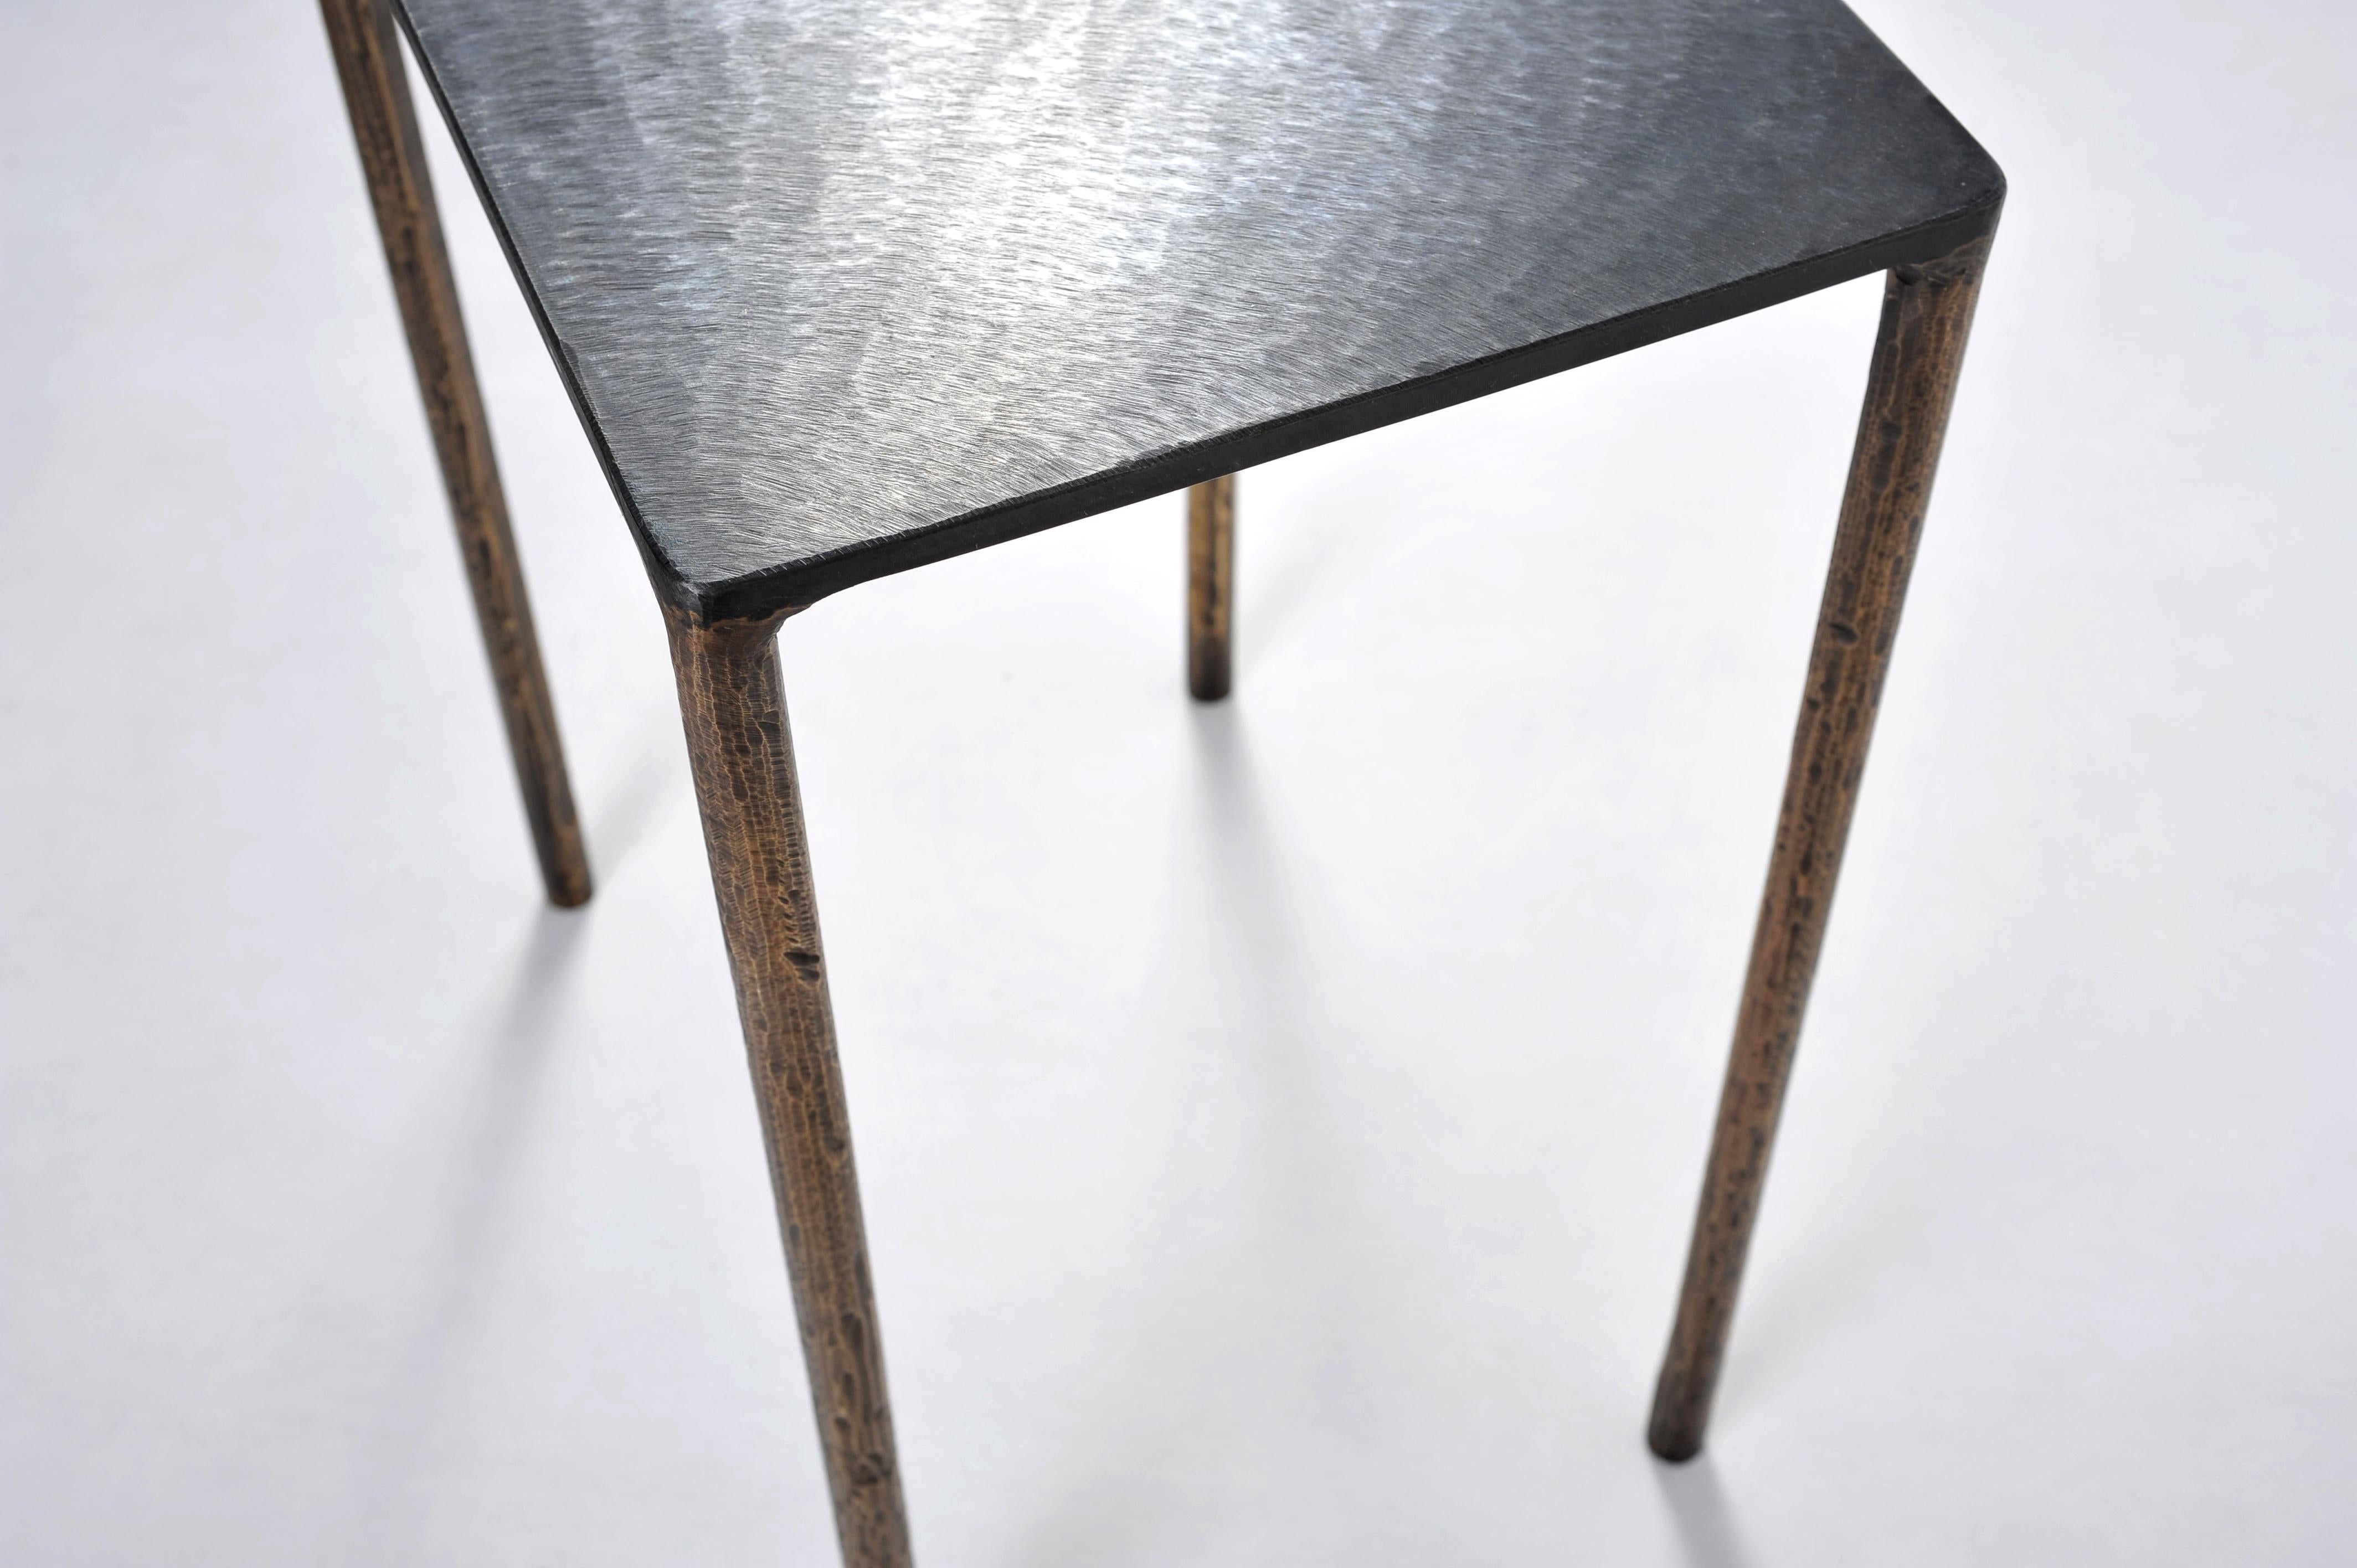 Brass side table signed by Lukasz Friedrich.
Textured side or coffee table.
Materials: Legs: Legs, patinated brass; top, patinated and waxed steel.
Dimensions: D 28 cm, L 38 cm, H 50 cm.
Signed and dated.

Lukasz Friedrich (born 1980), lives